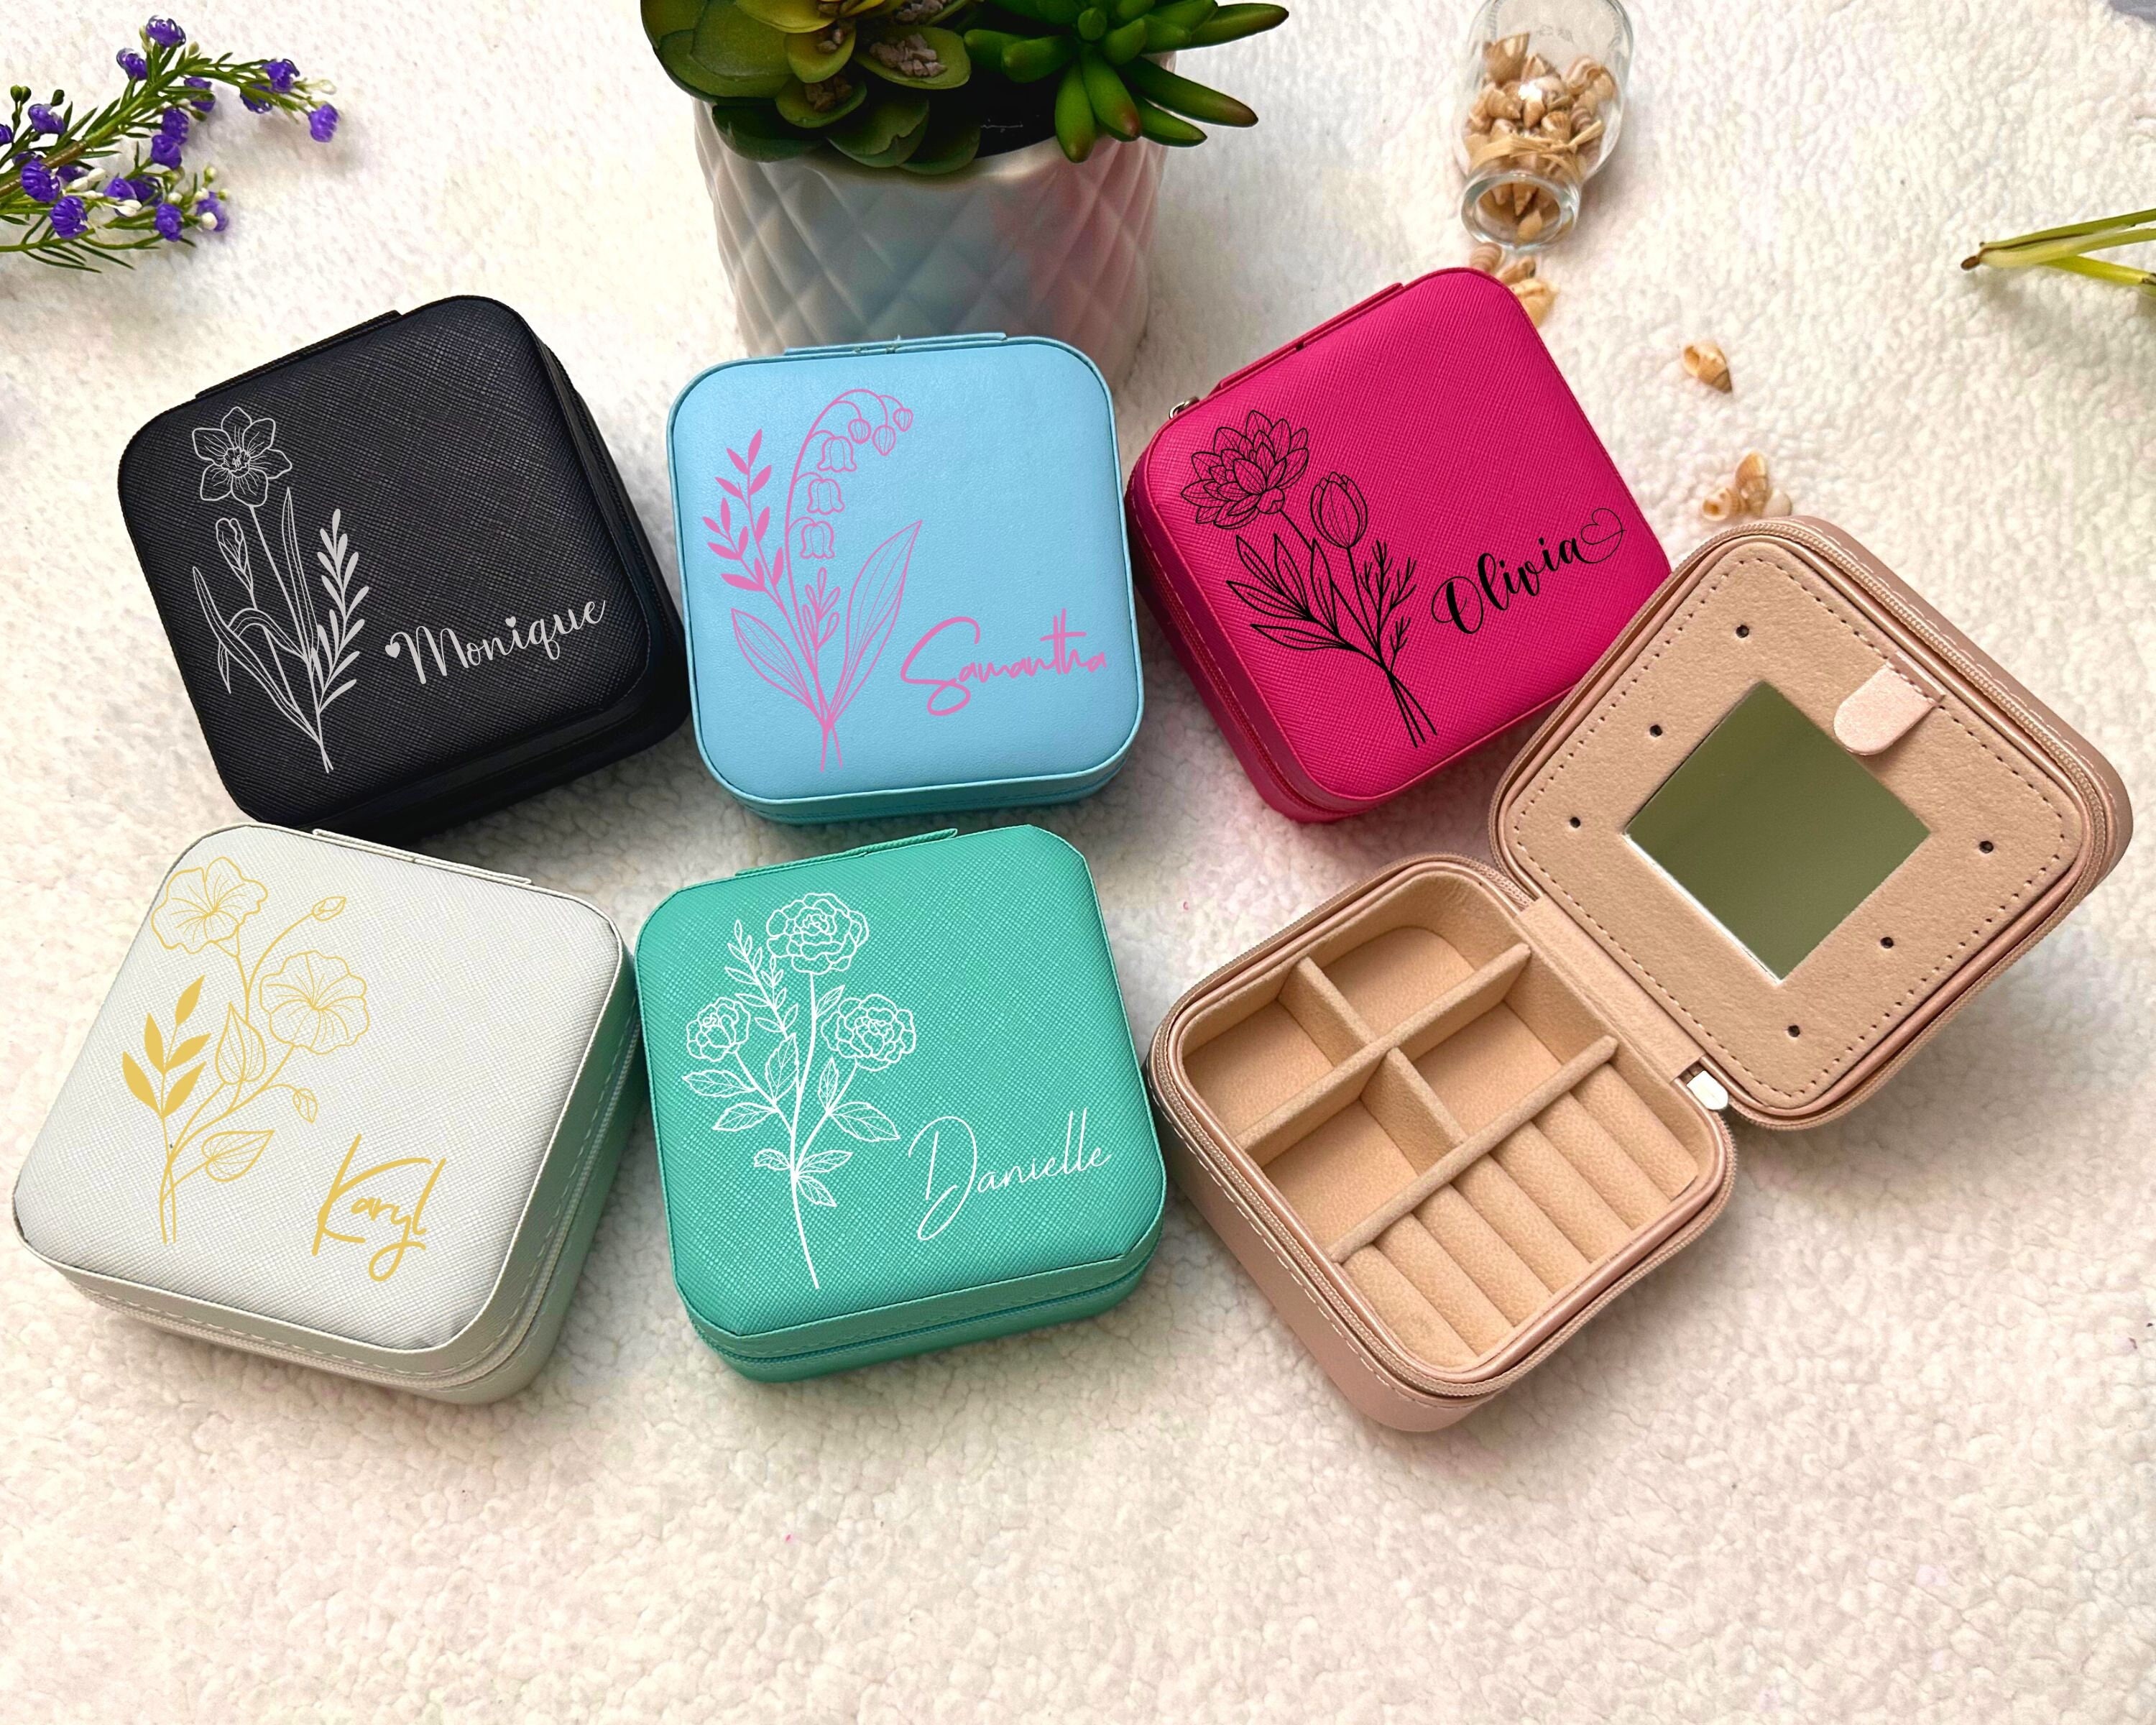 Leather Jewelry Travel Case,birth Flower Jewelry Box,personalized Name  Jewellery Box,mother's Day Gift,bridal Party Gifts,bridesmaid Gifts 